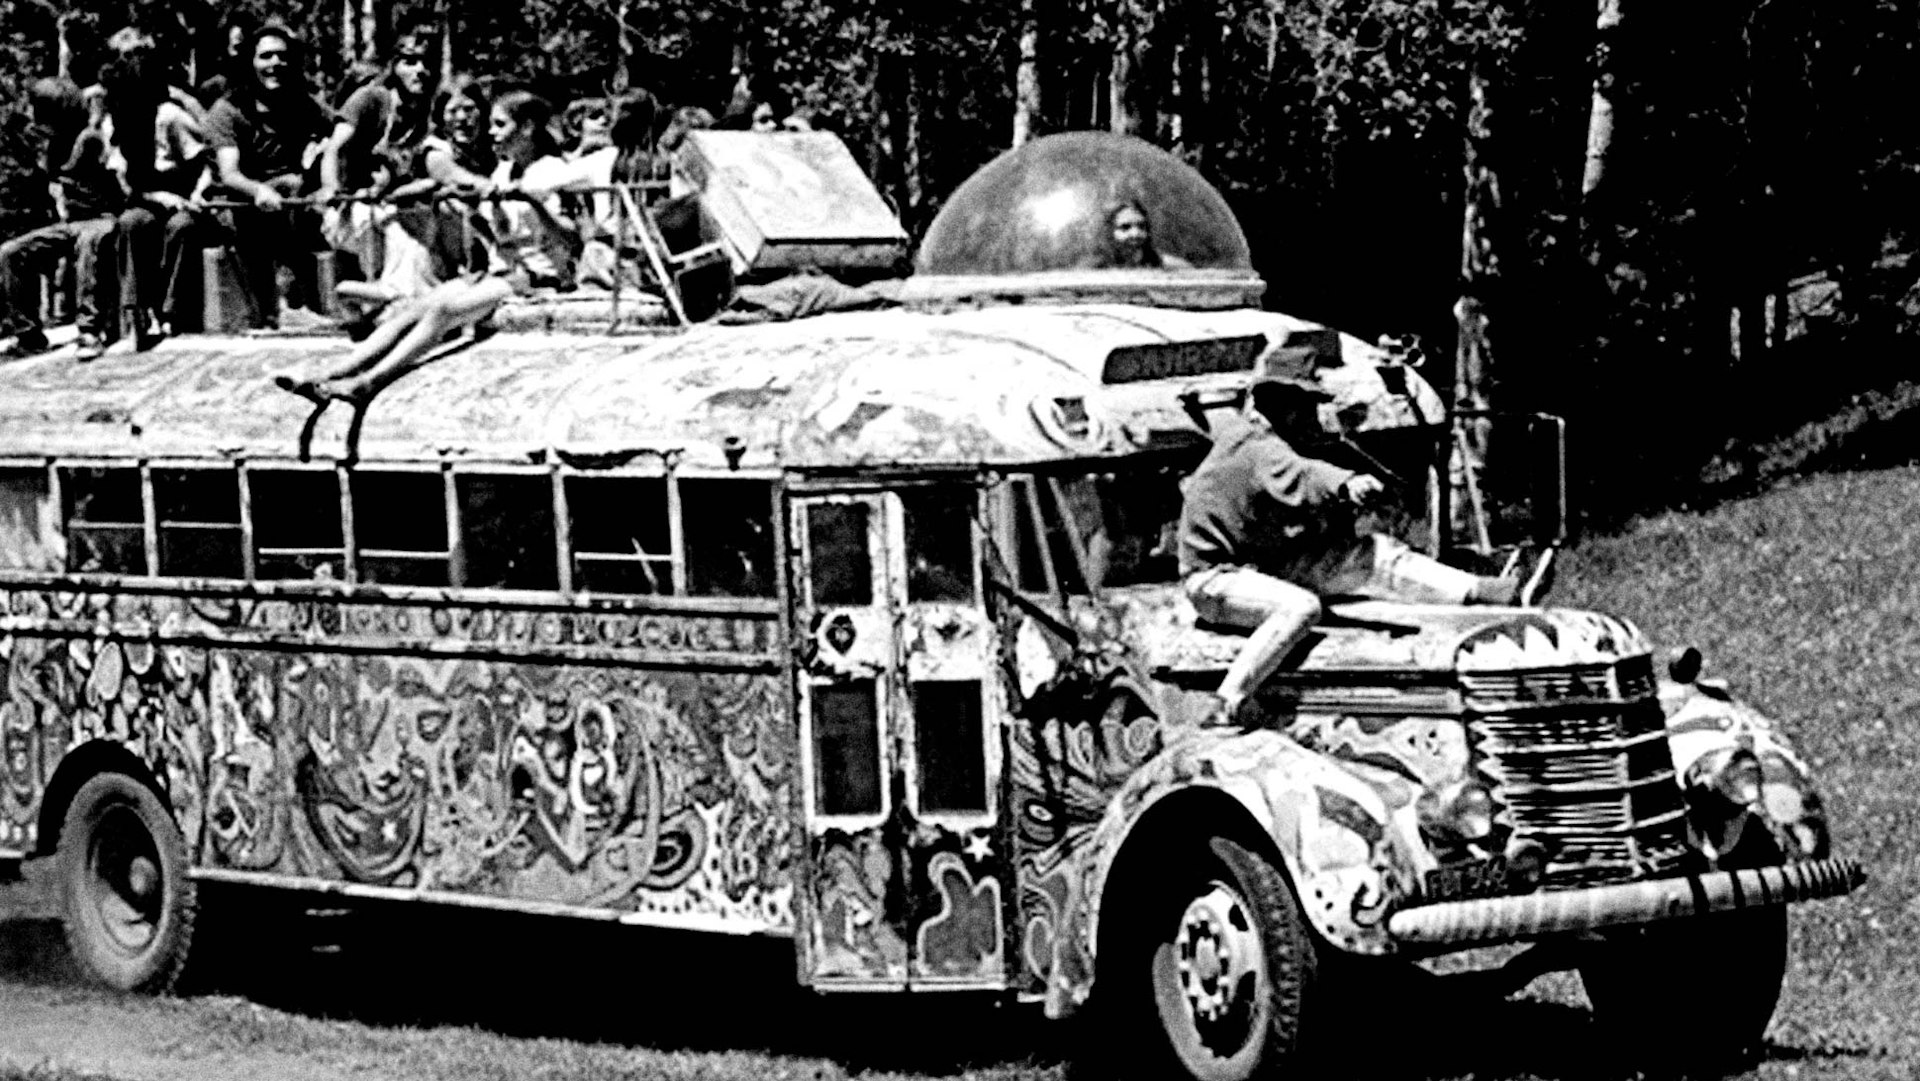 Ken Kesey and the Merry Pranksters roll into town on their psychedelic ride, ‘Further’, during the Great Bus Race in Aspen Meadows, Santa Fe, New Mexico. Summer Solstice, June 21, 1969. Photo by Lisa Law